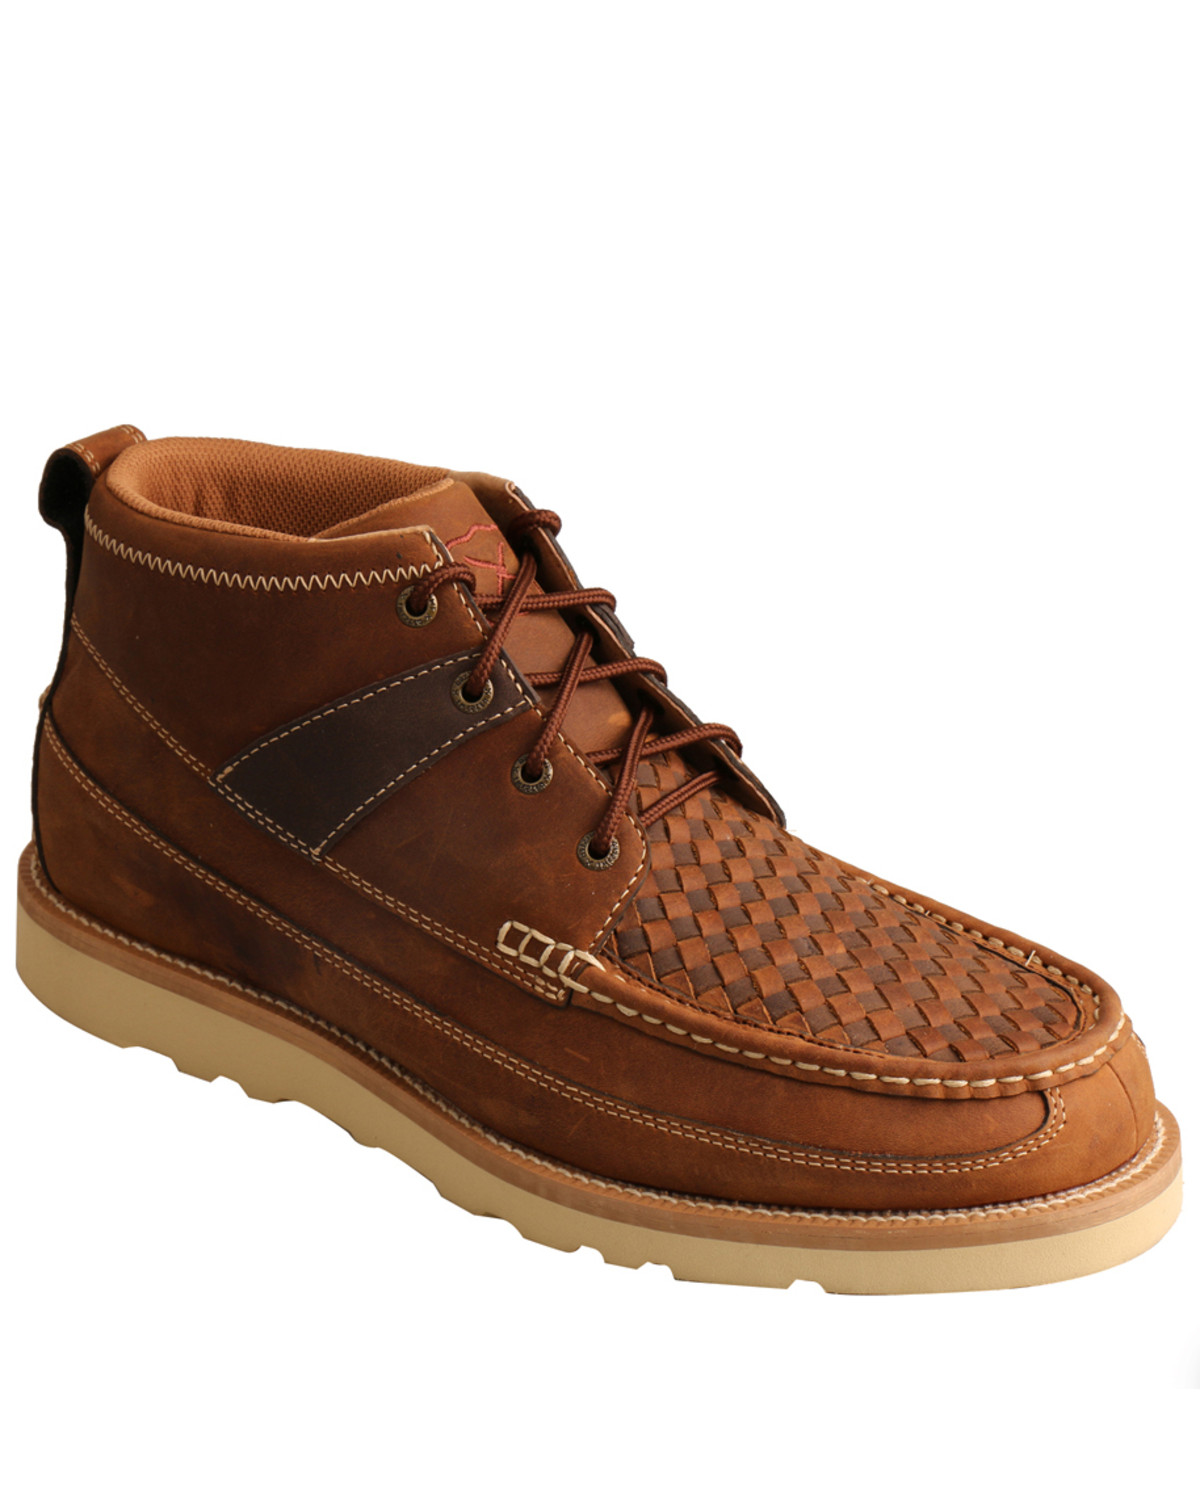 Men's Casual Lace-Up Boots